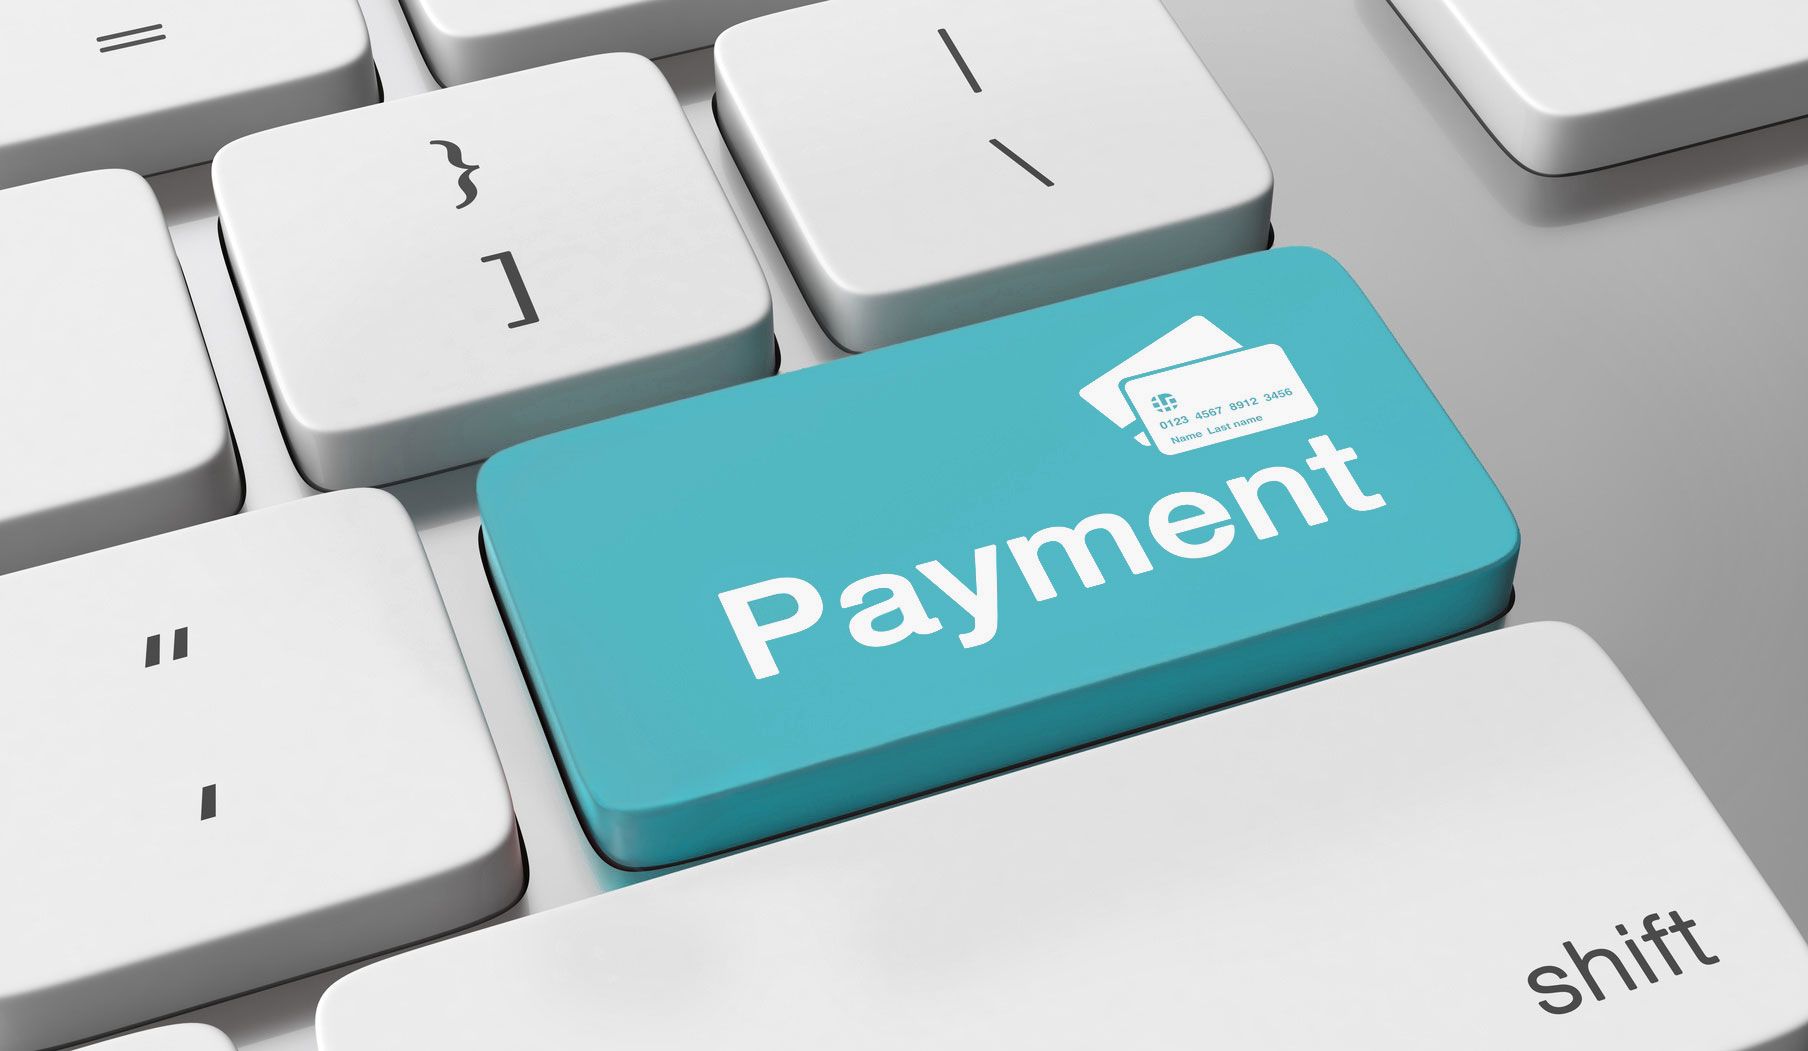 What payment options are available?